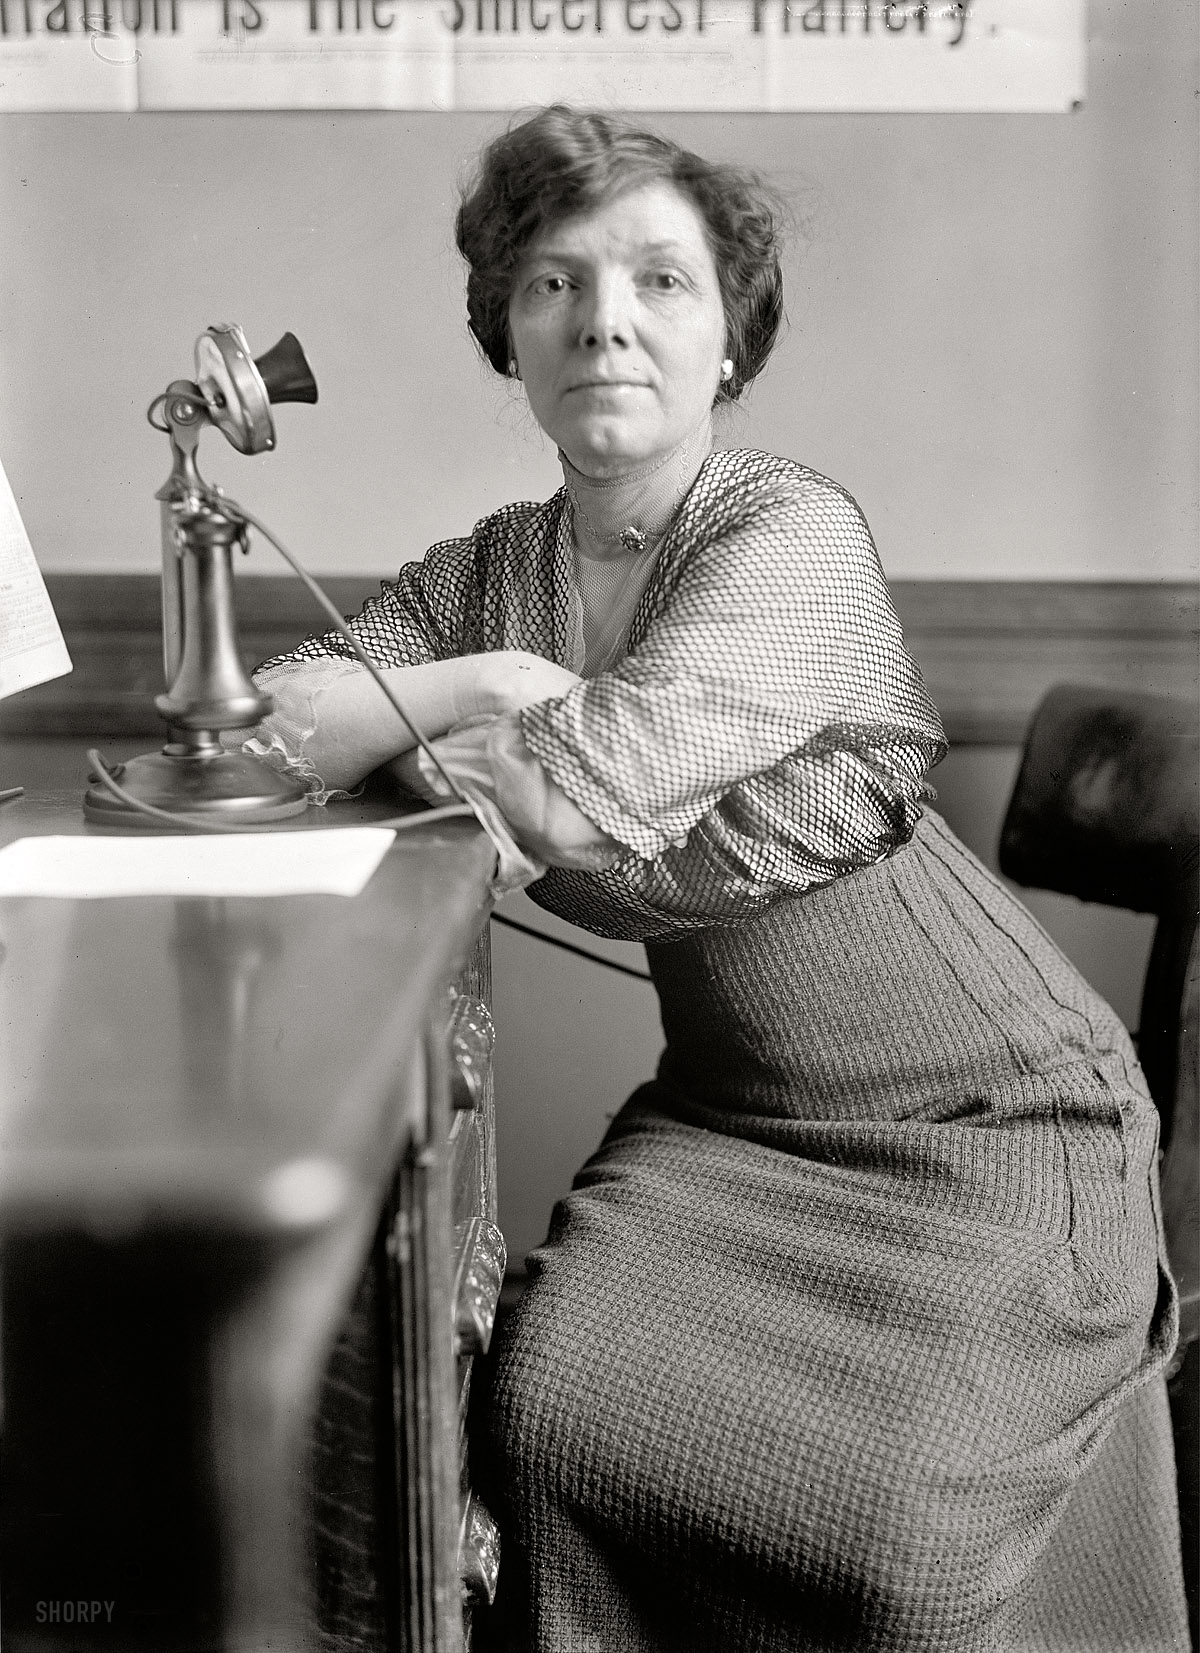 "Funk, Antoinette. Co-chairman N.A.W.S.A., 1914." Antoinette Funk of the National American Women Suffrage Association. Mrs. Funk, who was admitted to the Illinois  bar in 1899, was U.S. Assistant Commissioner of Public Lands from 1933 to 1939. Harris & Ewing Collection glass negative. View full size.